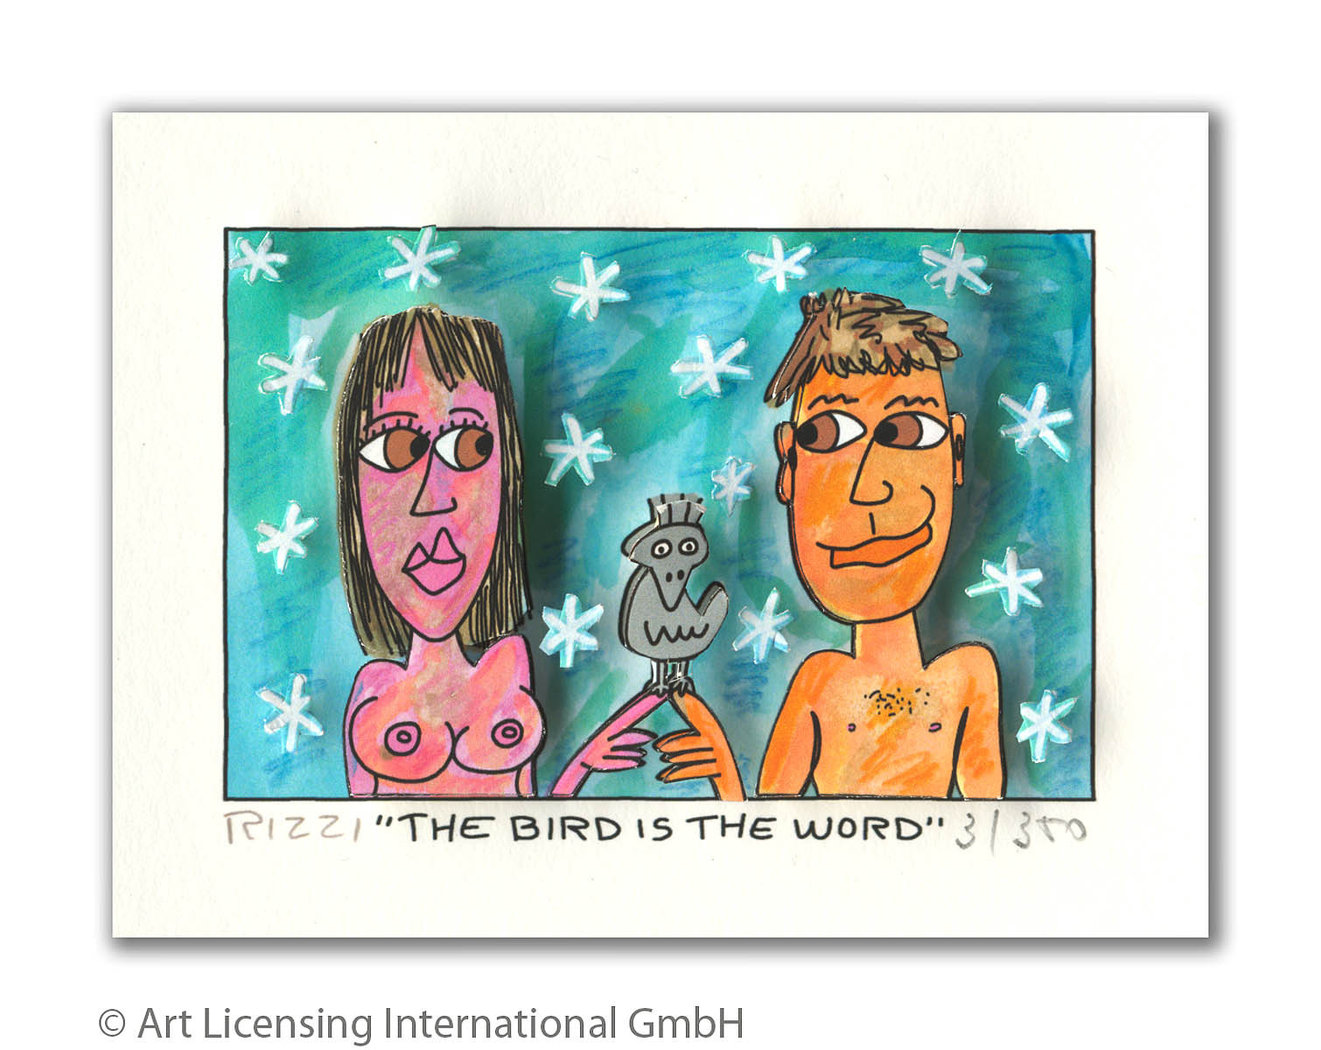 James Rizzi - THE BIRD IS THE WORD